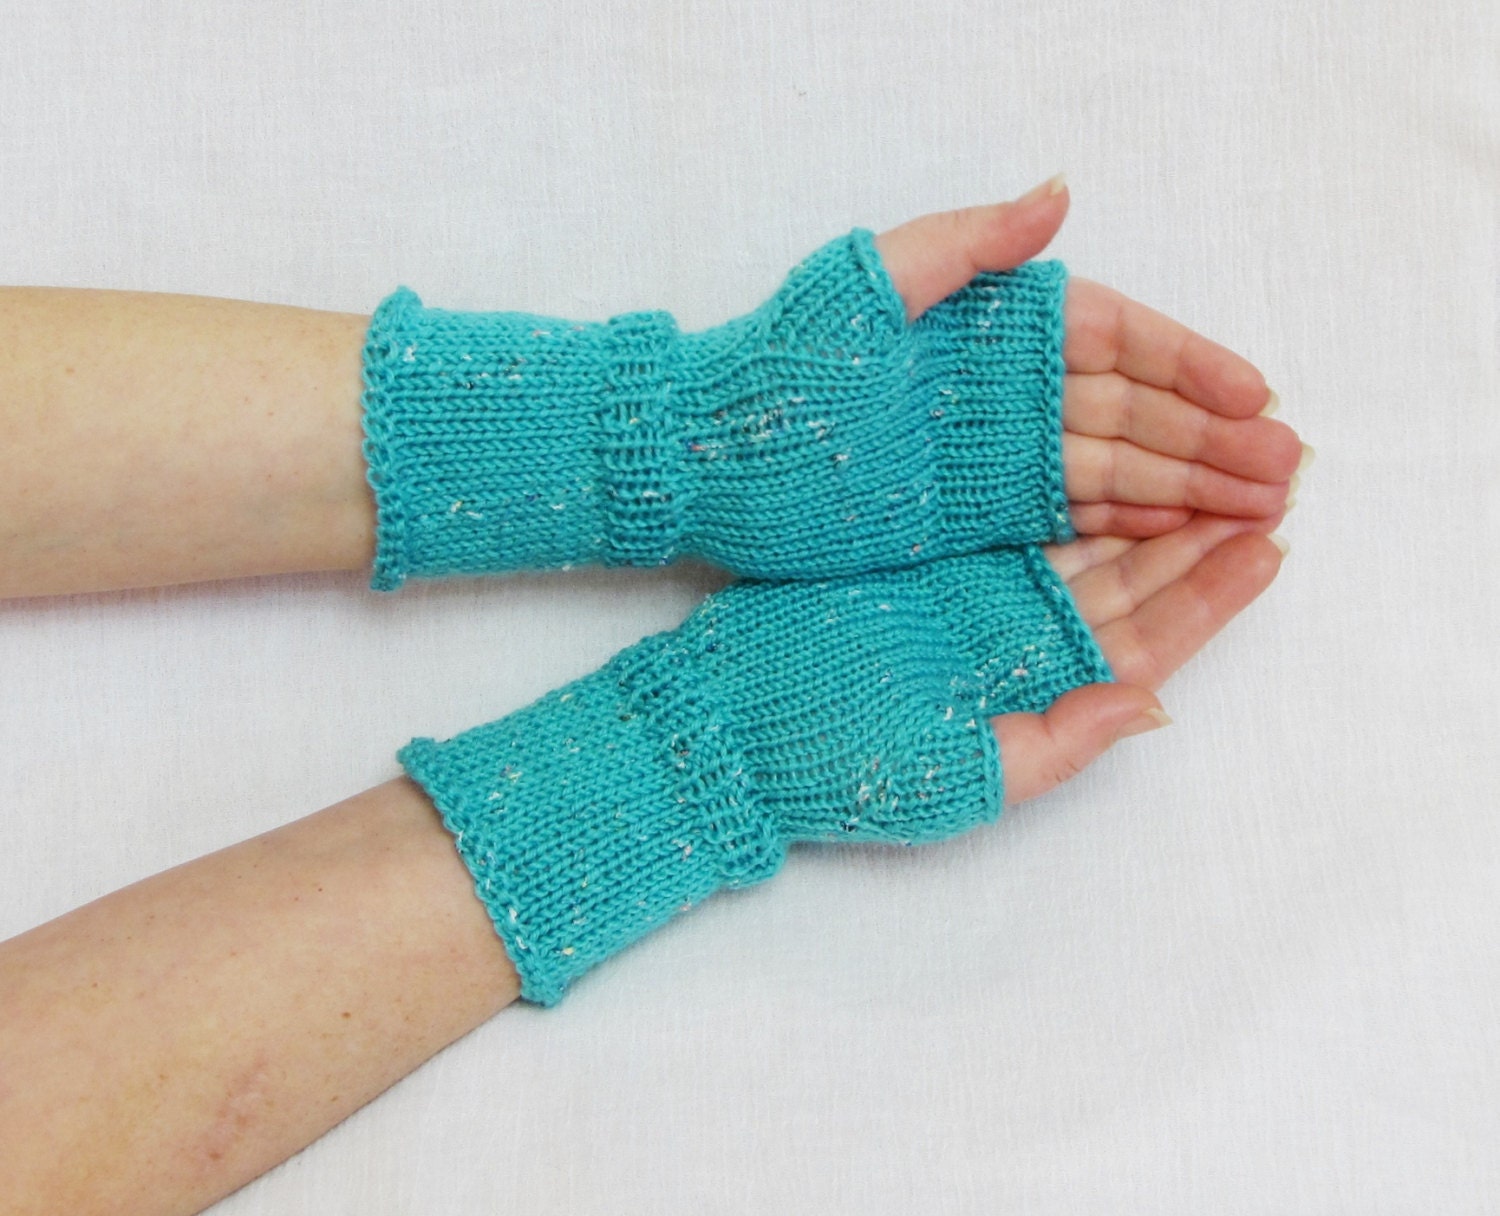 turquoise mittens,blue mittens,fingerless gloves,arm warmers,accessories,wrist warmers,knit fingerless gloves,wool cable knit,hand warmers - HandMadeLana